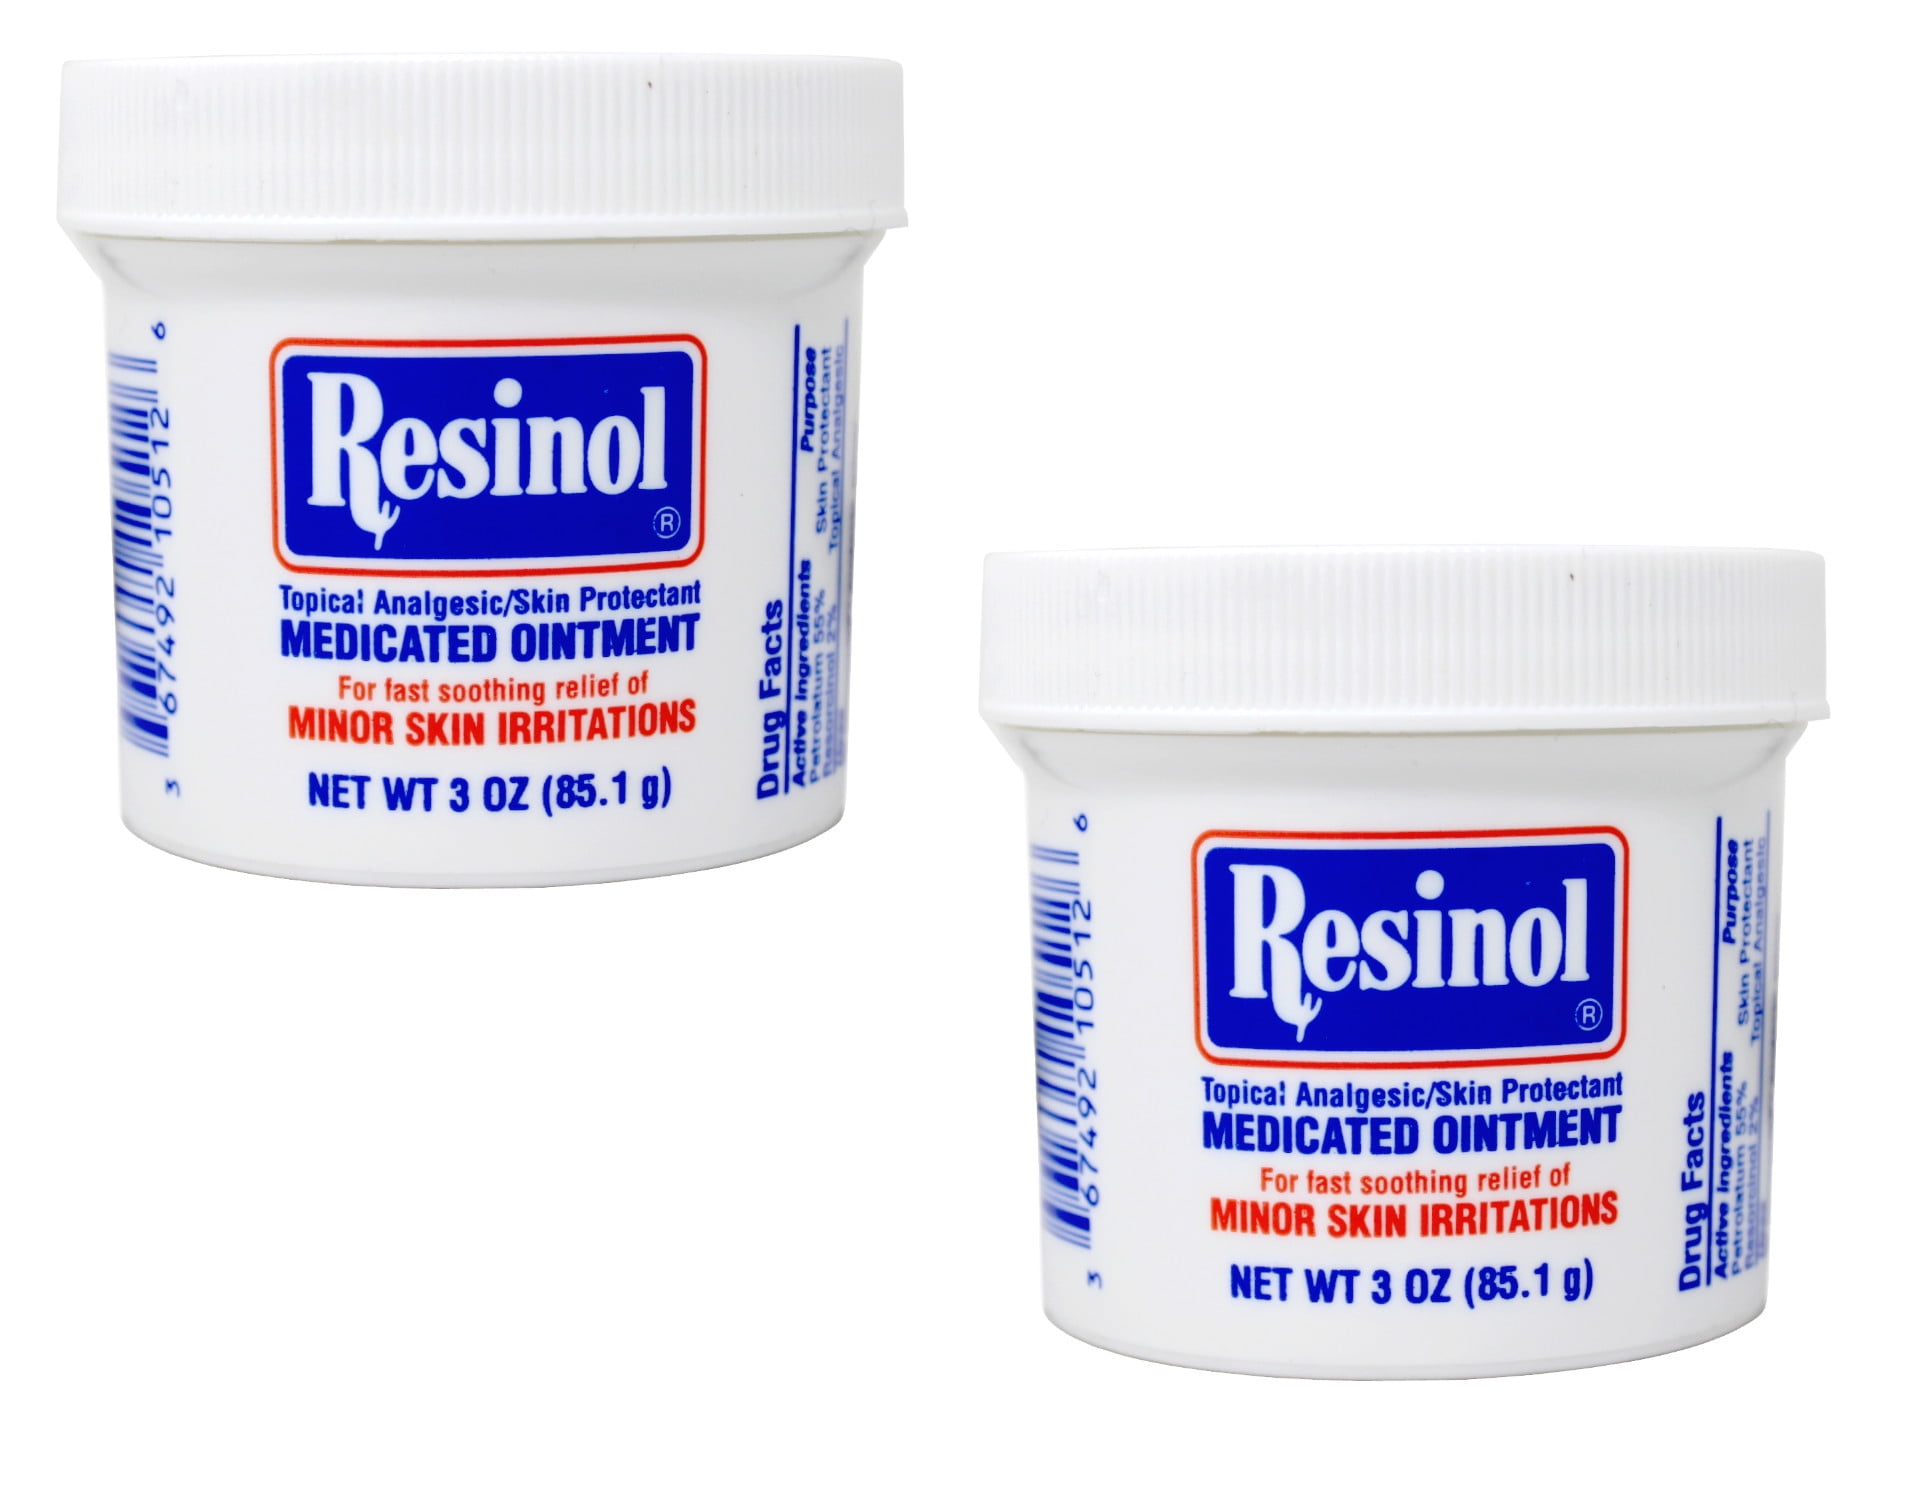 Resinol Medicated Ointment, Skin Protectant, 1.25 oz/35.4 g Ingredients and  Reviews